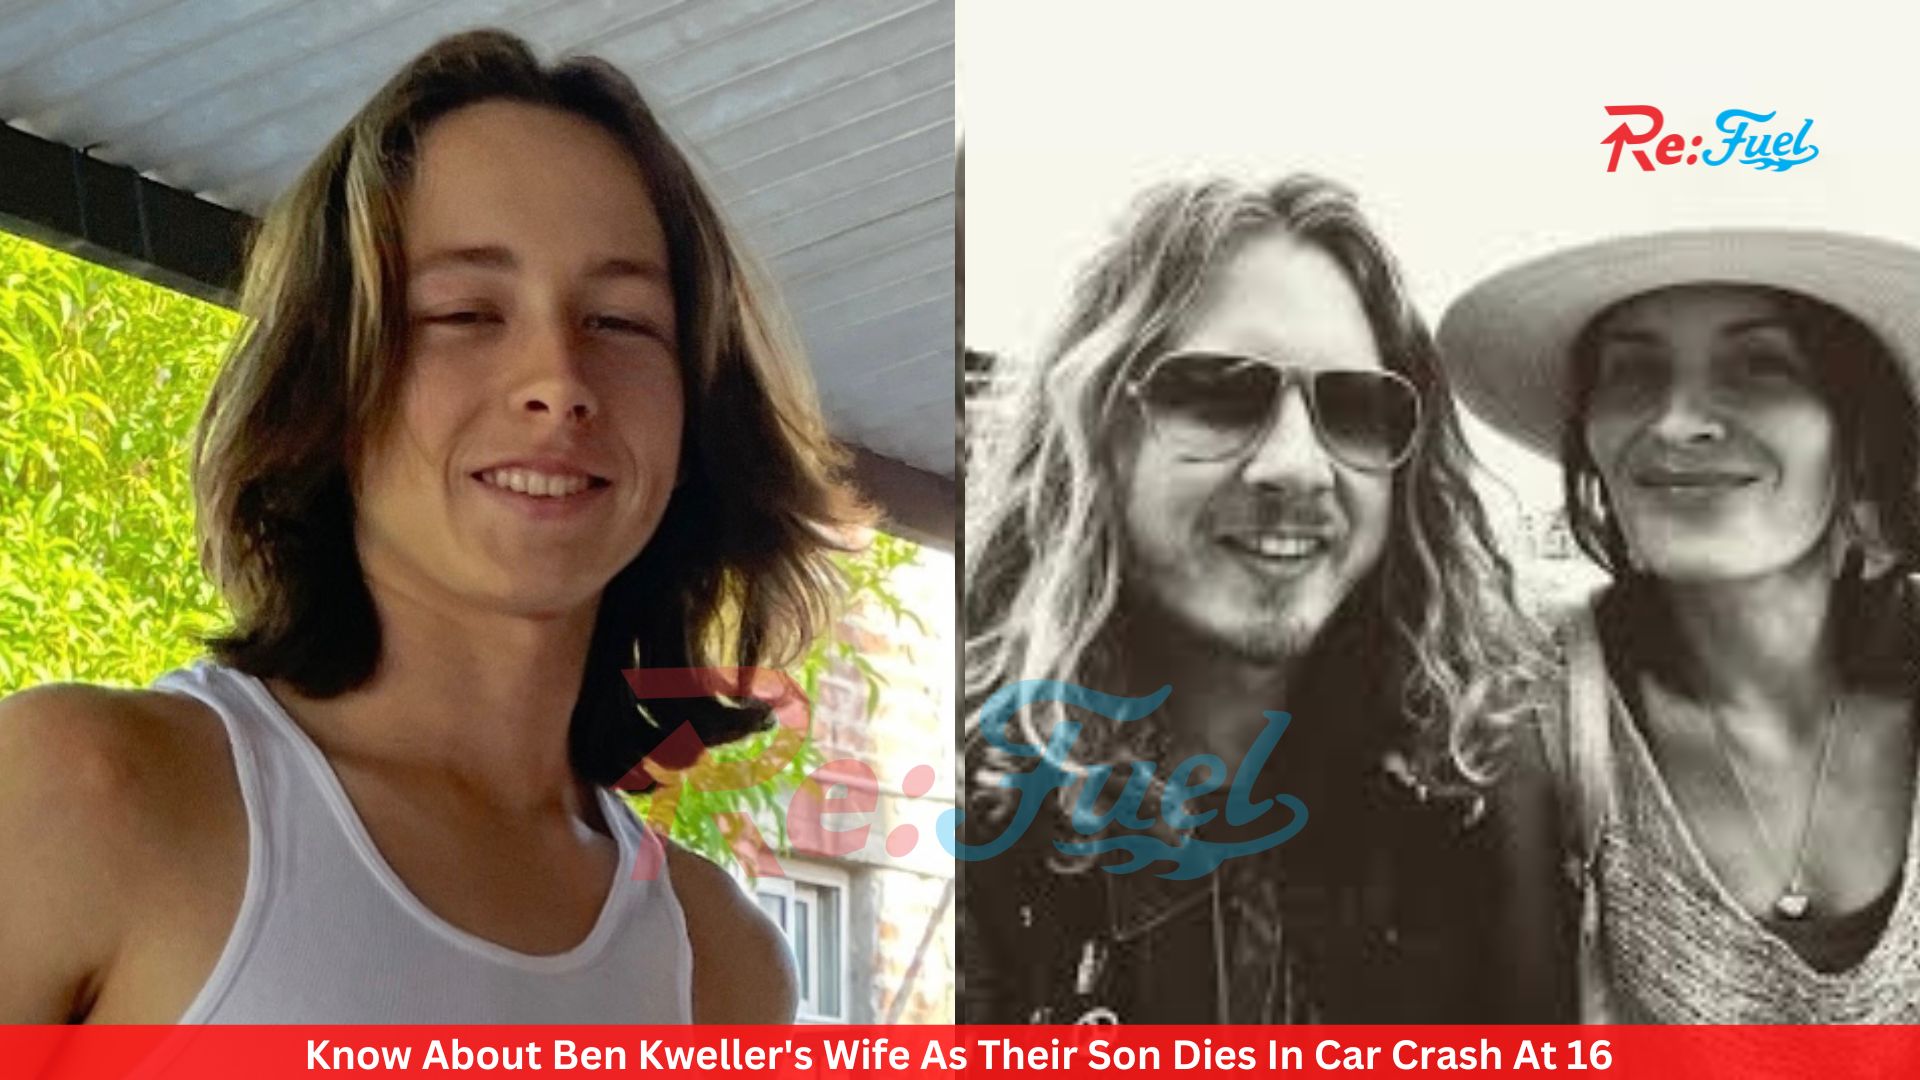 Know About Ben Kweller's Wife As Their Son Dies In Car Crash At 16